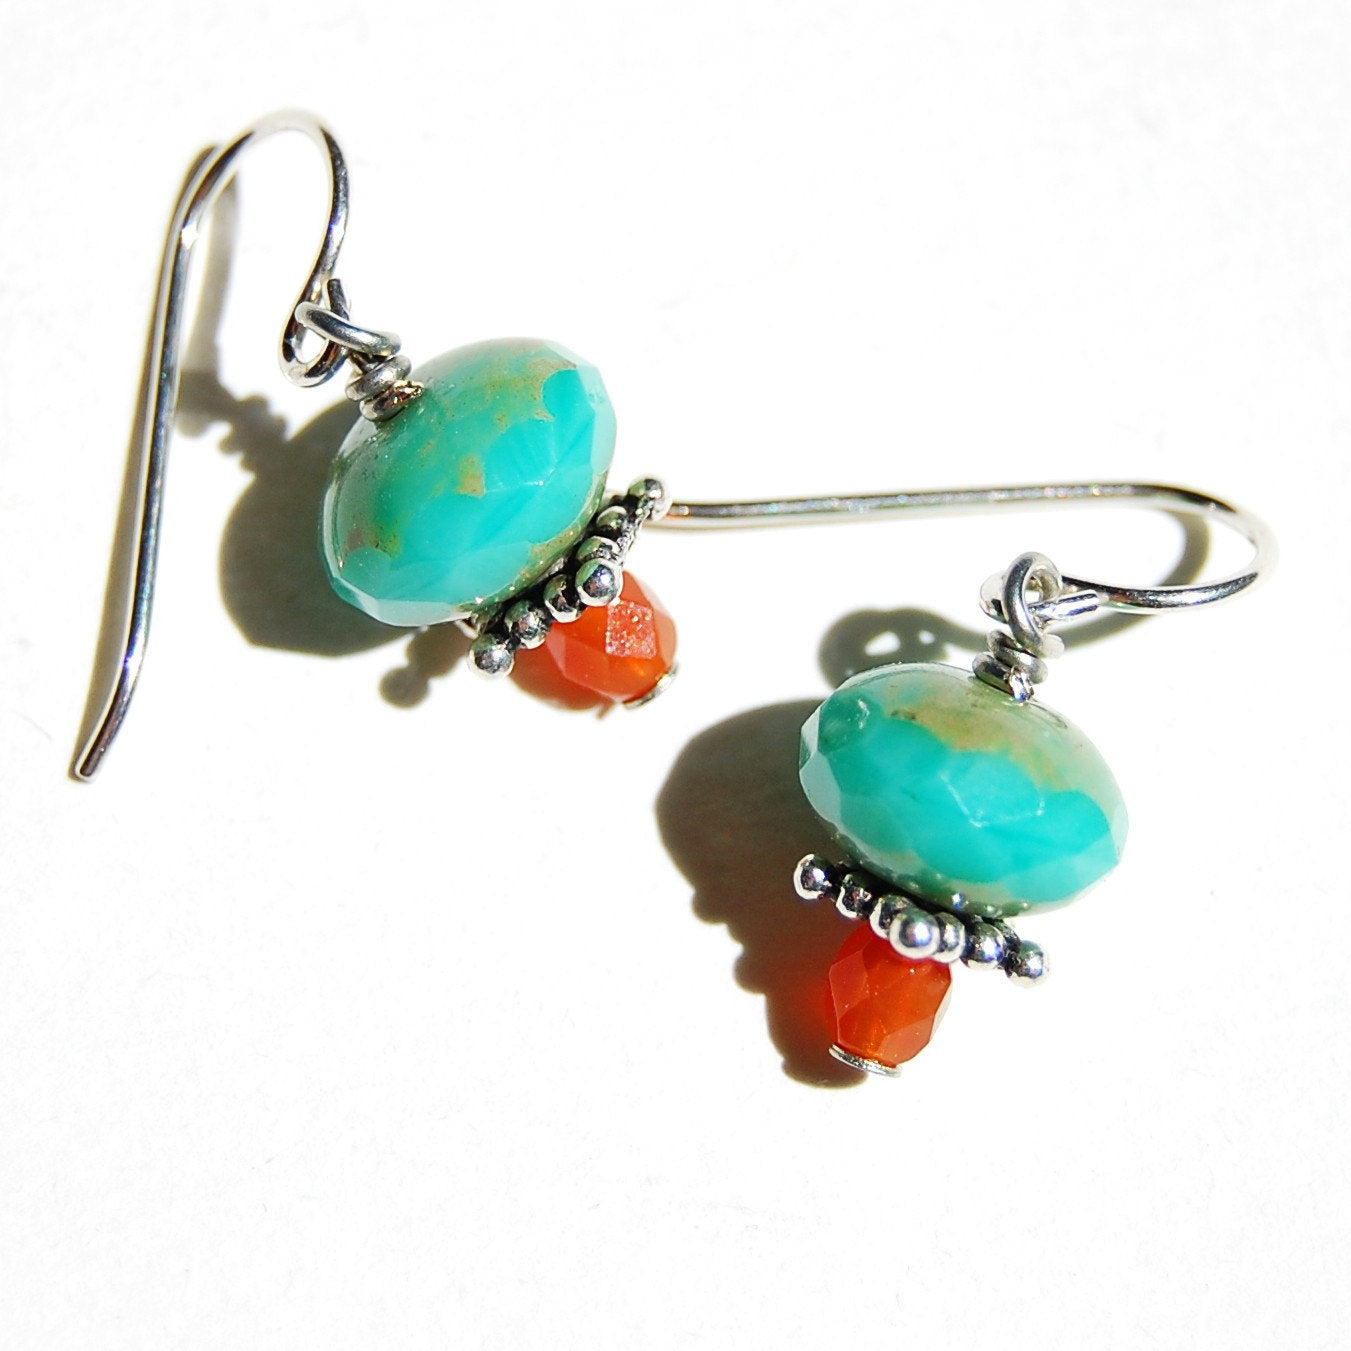 Faceted orange and turquoise-colored Czech glass small earrings